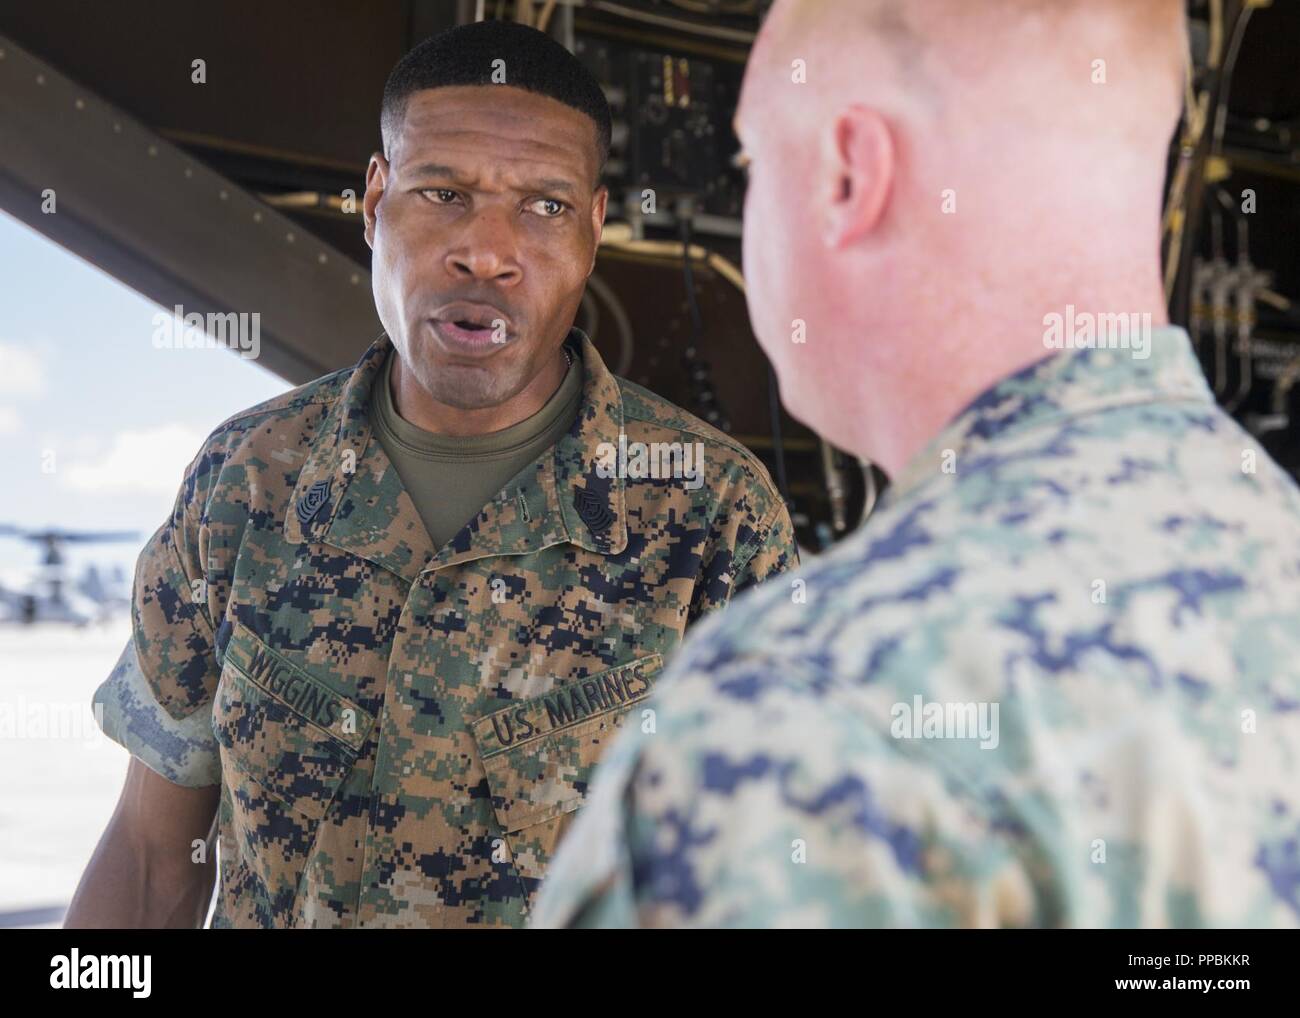 U.S. Marine Corps Sgt.Maj. Clifford W. Wiggins speaks to a Marine with Marine Medium Tiltrotor Squadron 365 during a visitation on Marine Corps Air Station New River, August 28, 2018. Sgt.Maj. Wiggins visited squadrons to assist the Marine Forces Command, commanding general, orient himself on the current status of 2d Maw. Wiggins is the Sgt.Maj. of Marine Forces Command. Stock Photo